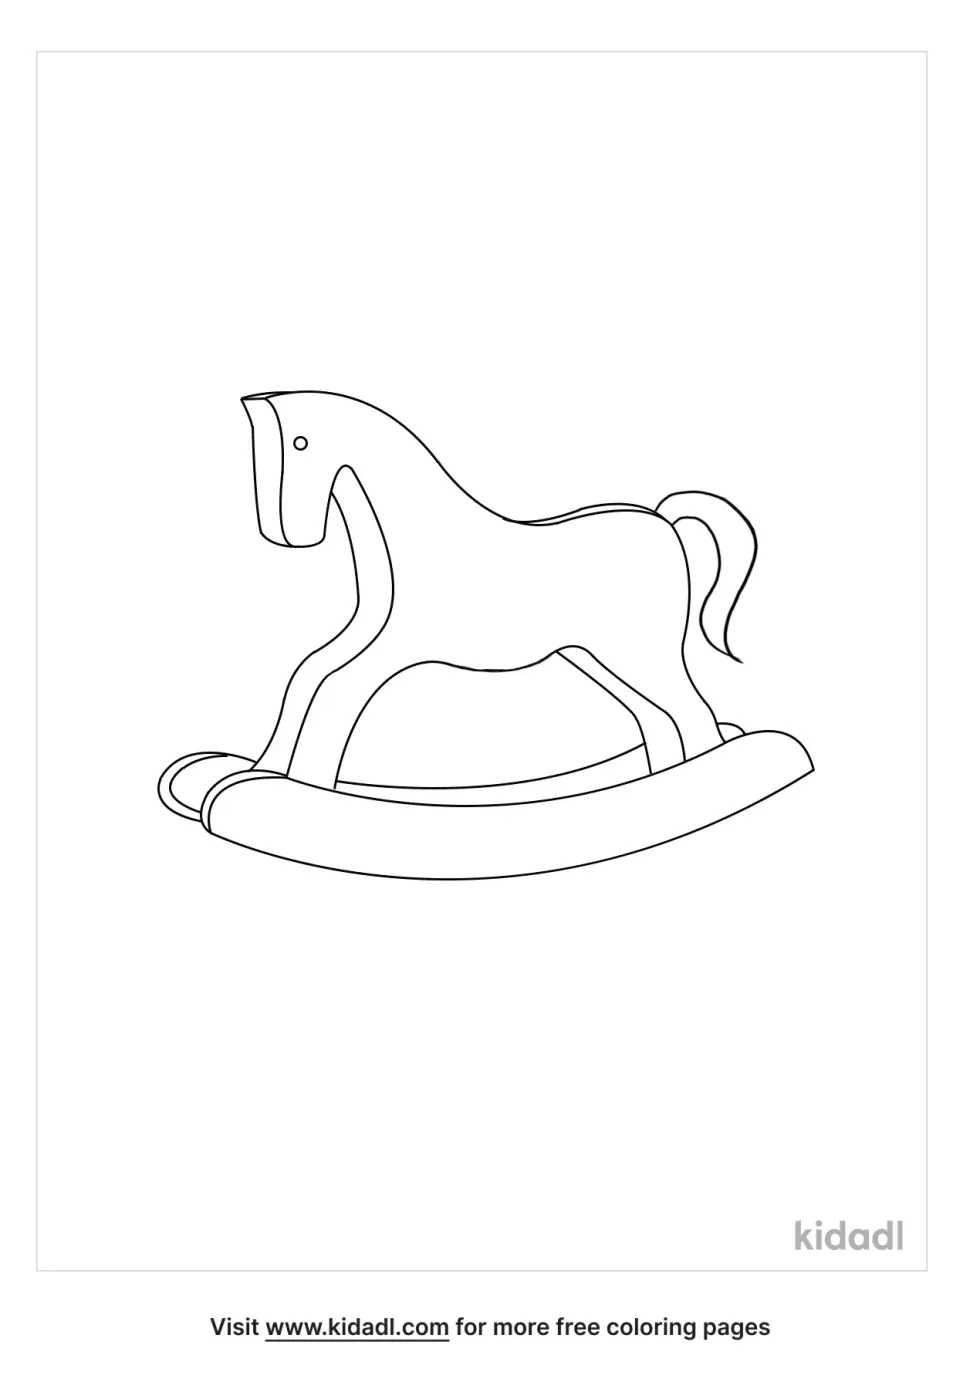 Toy Animal Coloring Page